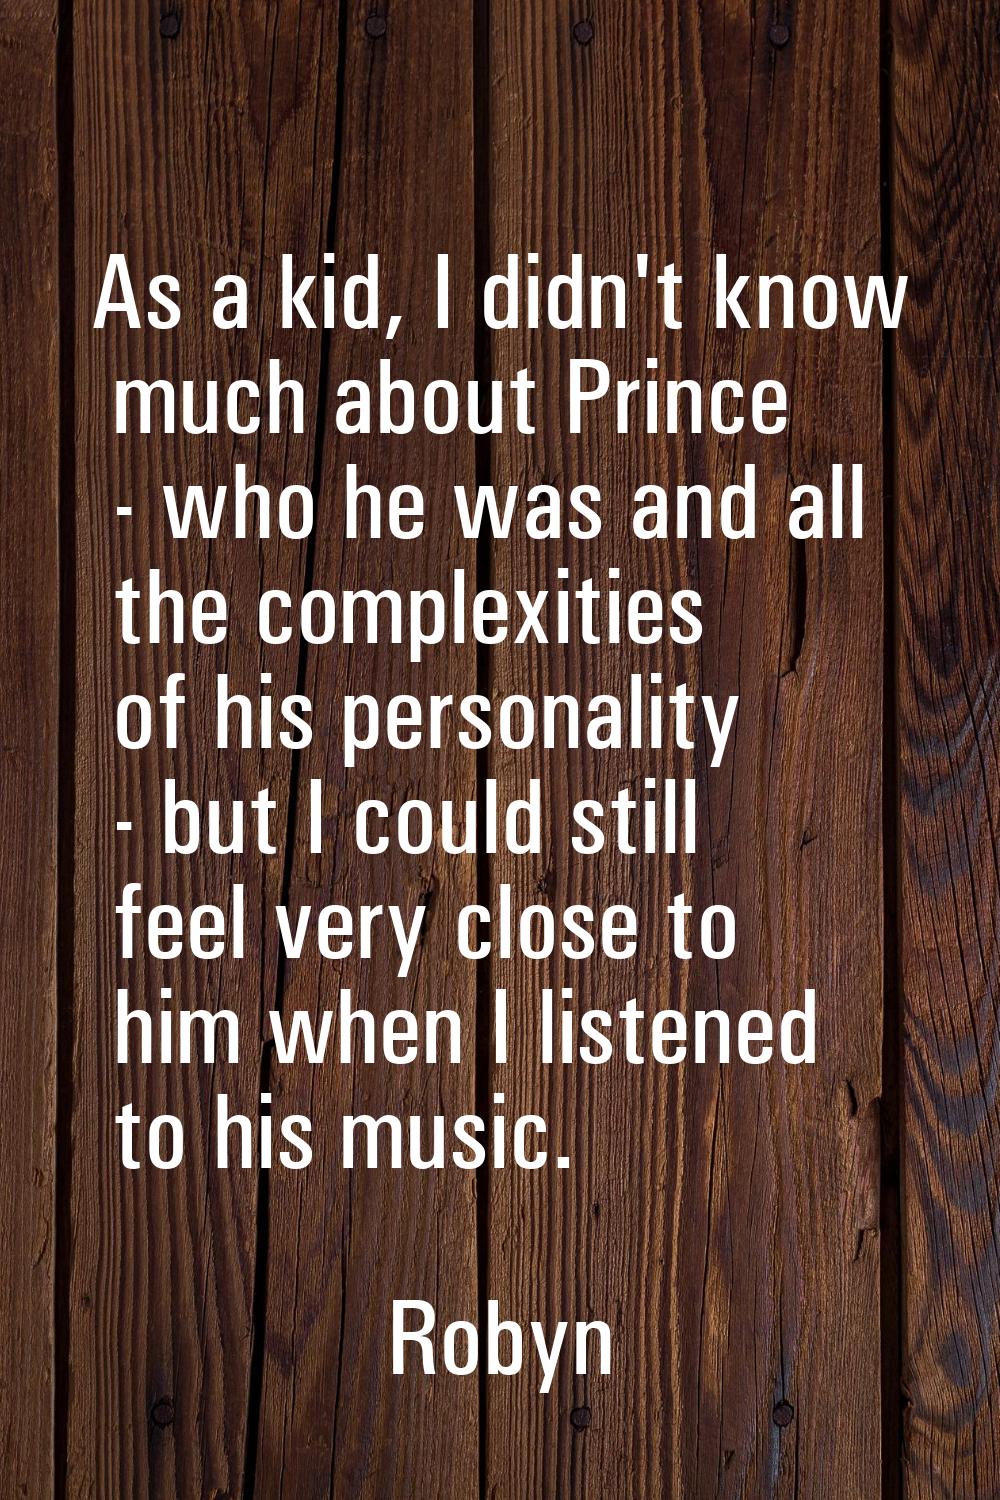 As a kid, I didn't know much about Prince - who he was and all the complexities of his personality 